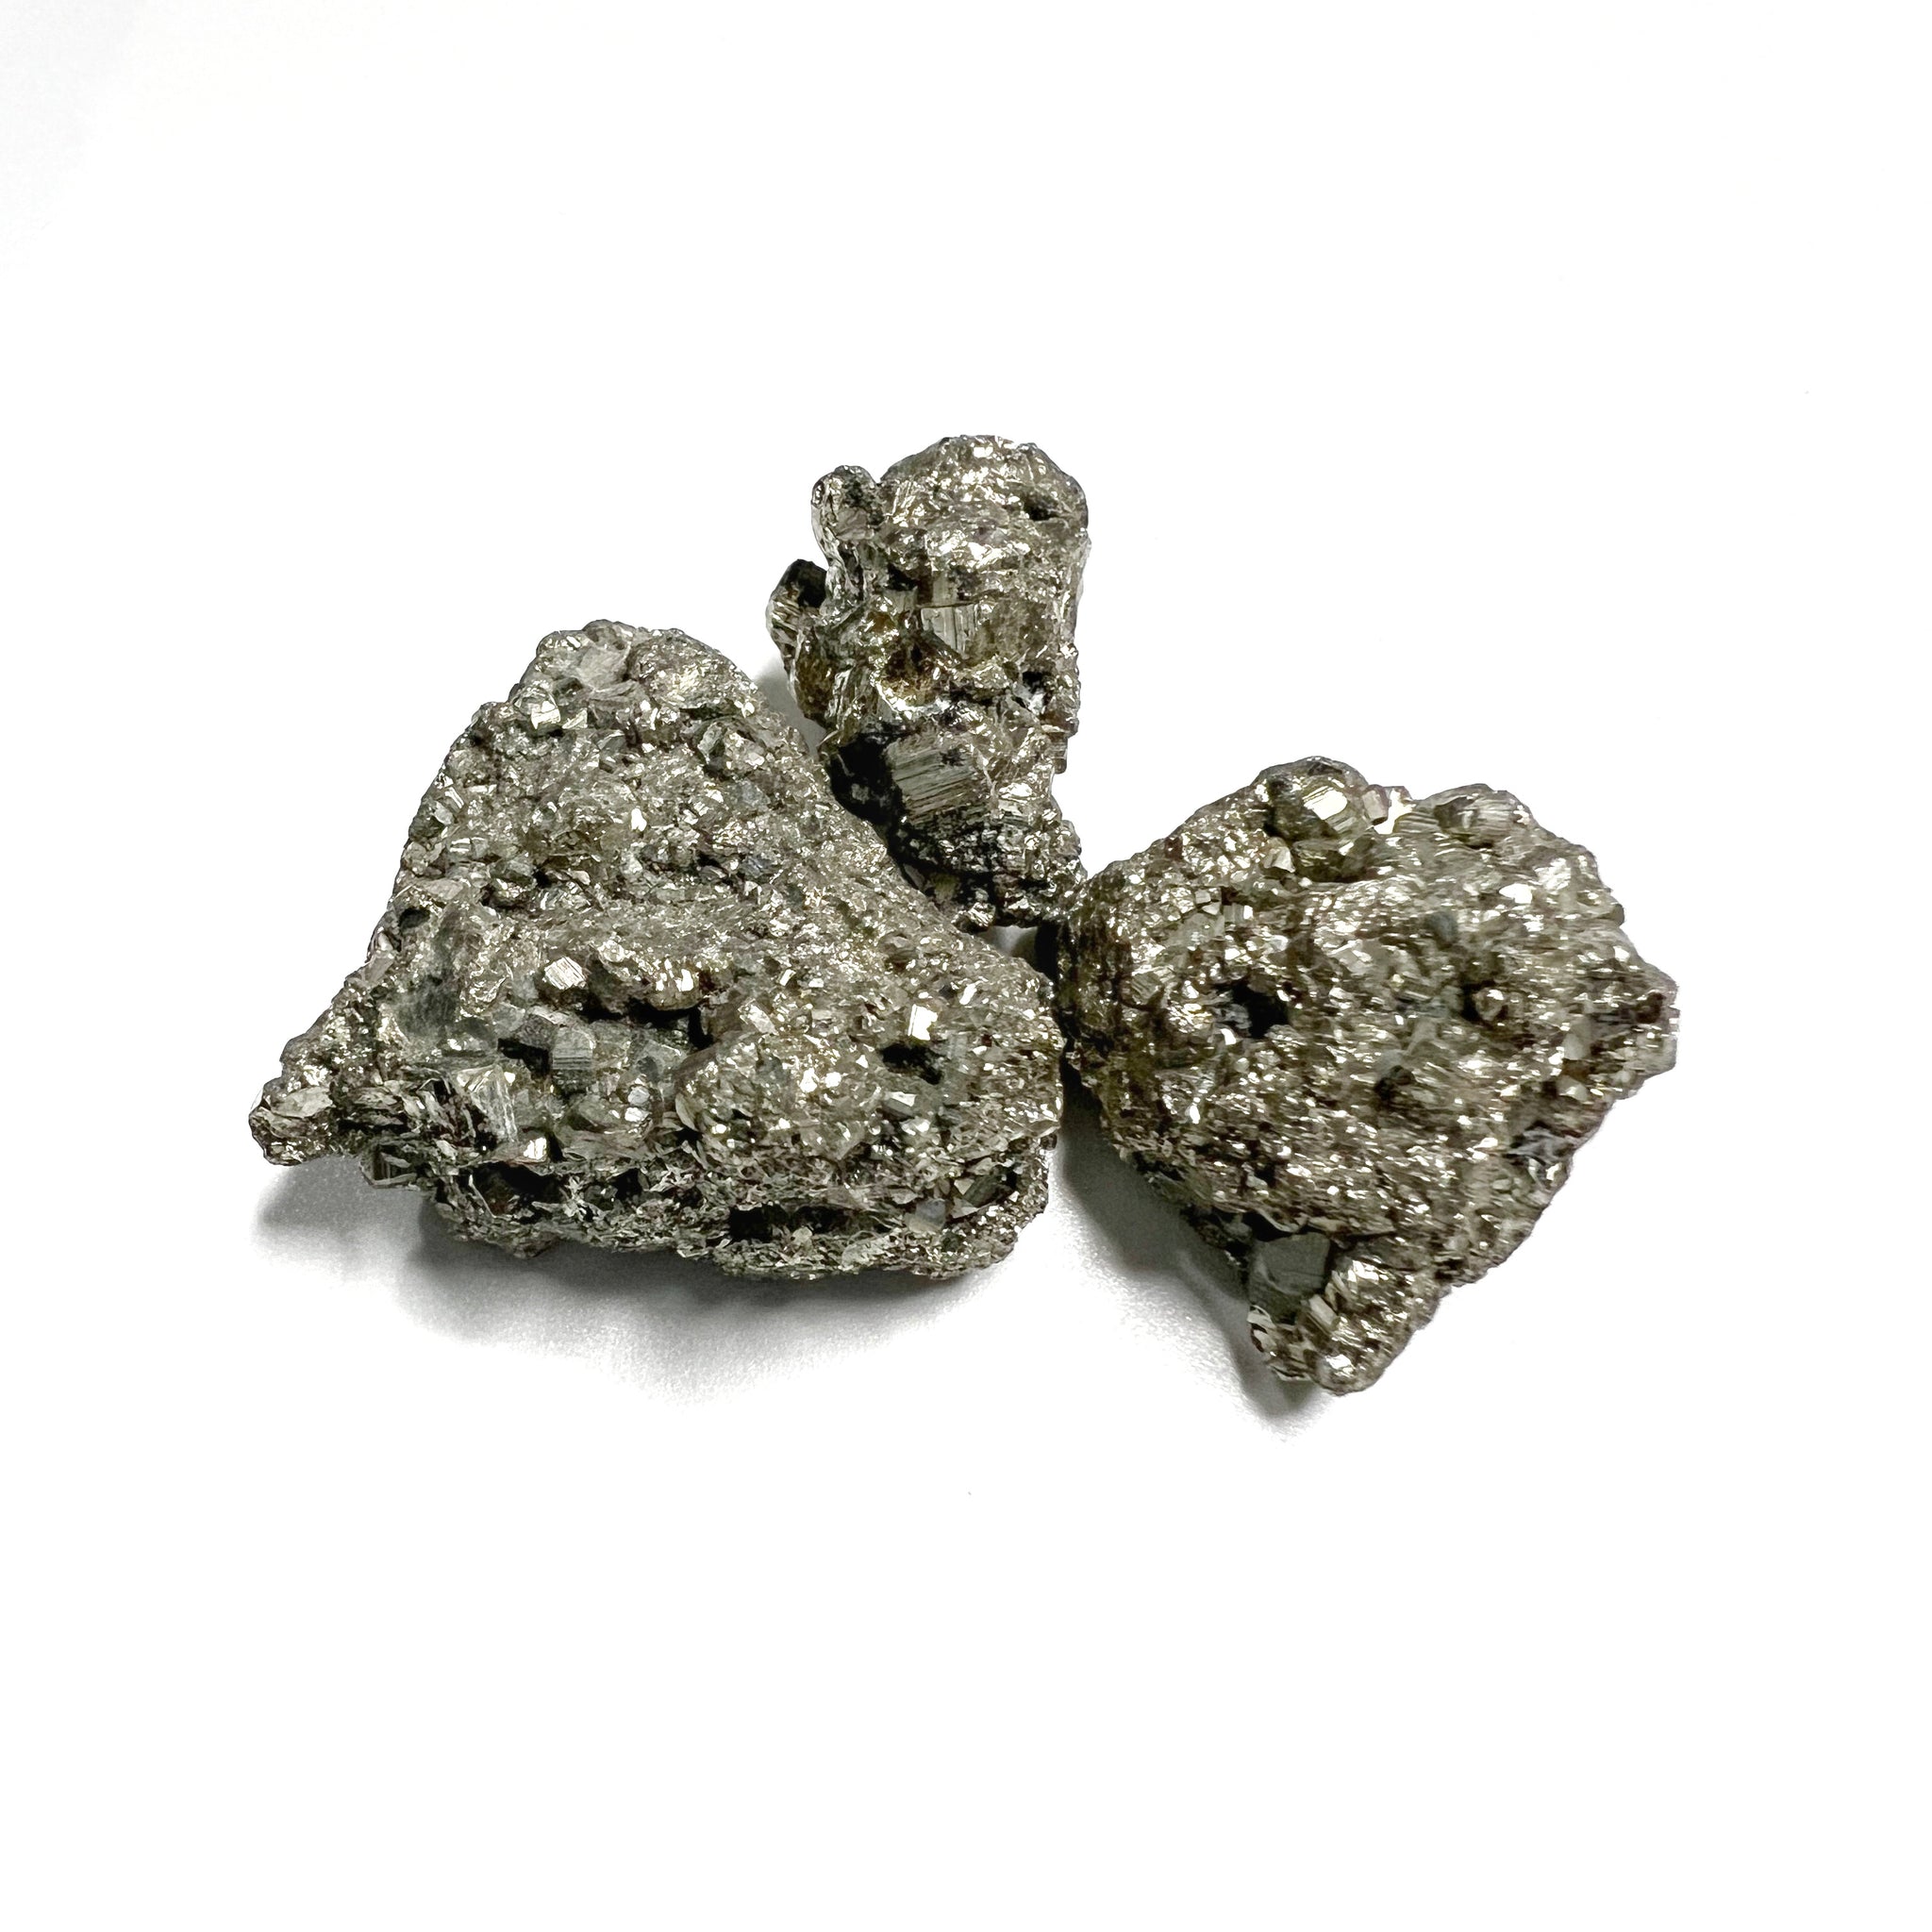 CERTIFIED NATURAL PYRITE  ROCK - SILVER BLACK SPARKLING COLOUR MEDITATION HEALING ACCESSORY HOME OFFICE GIFT